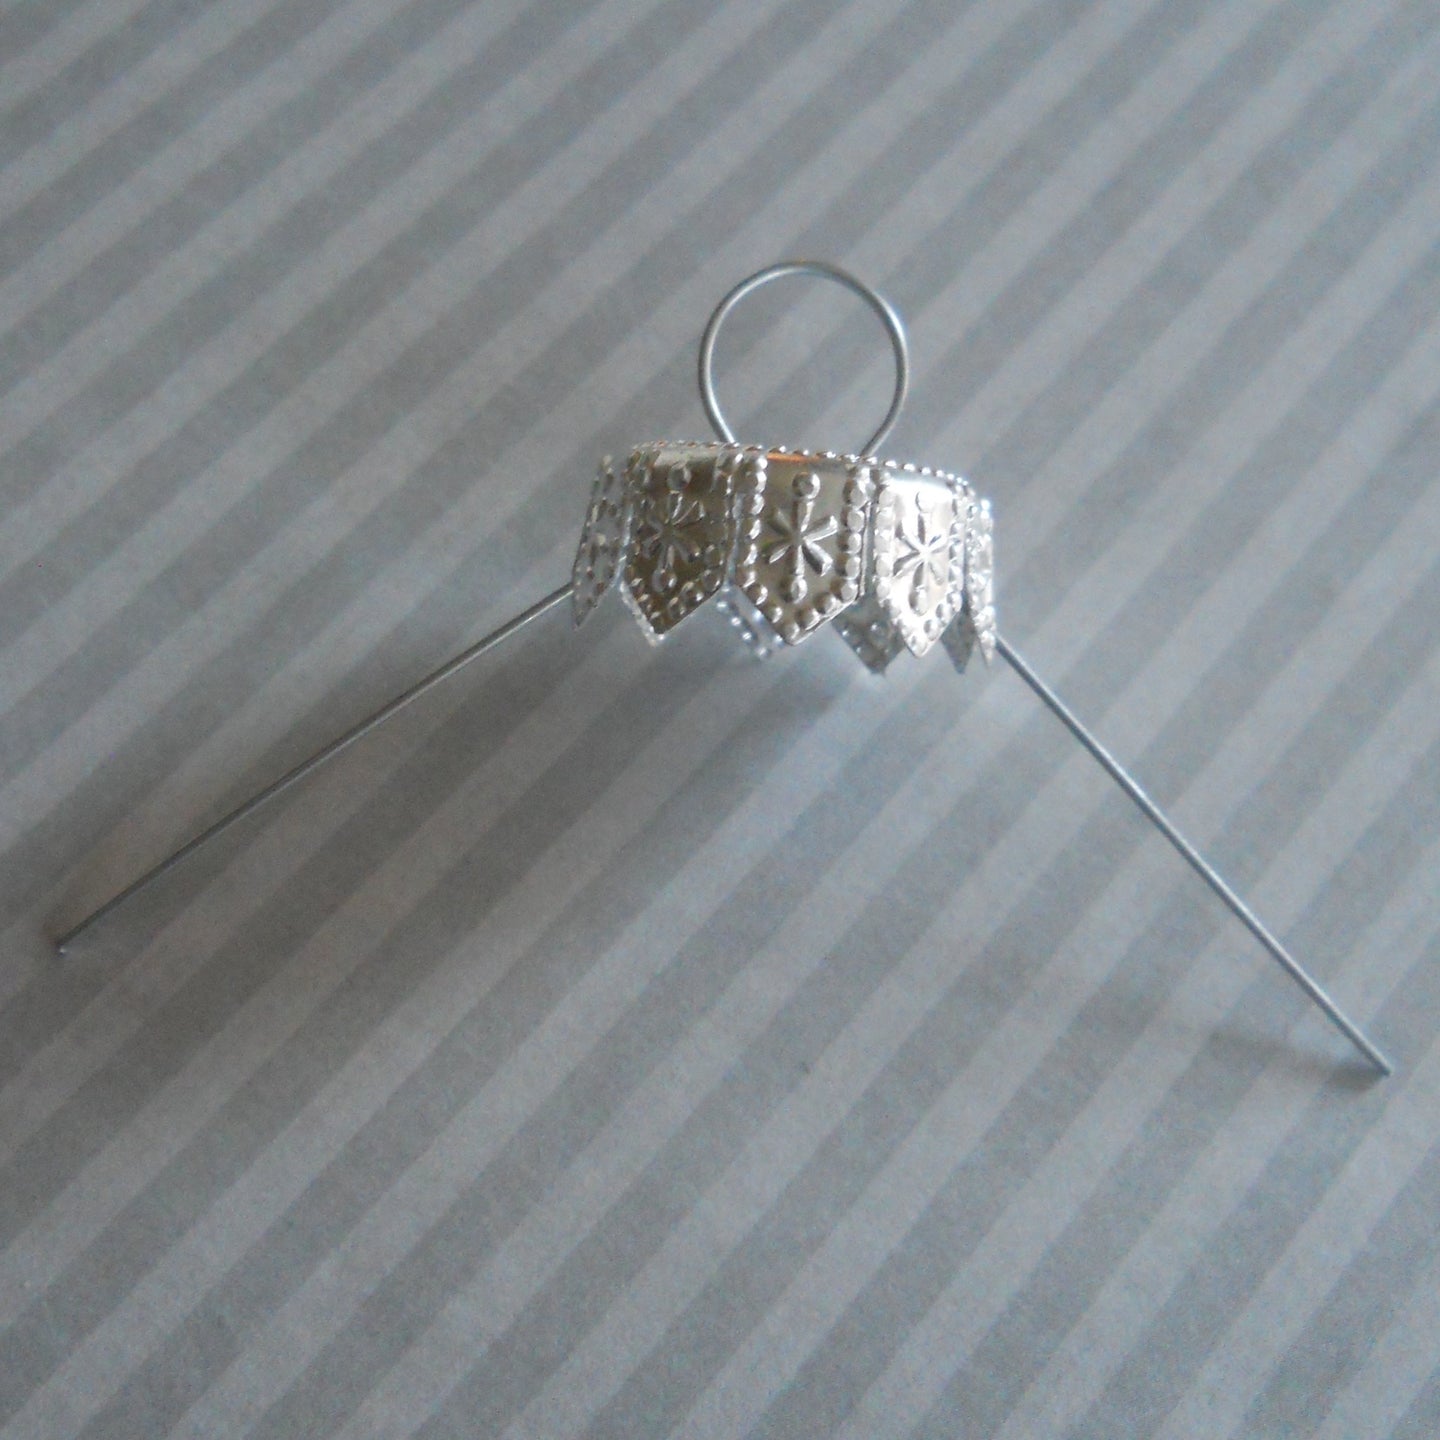 20-mm metal cap with wire hanger, traditional silver color cap